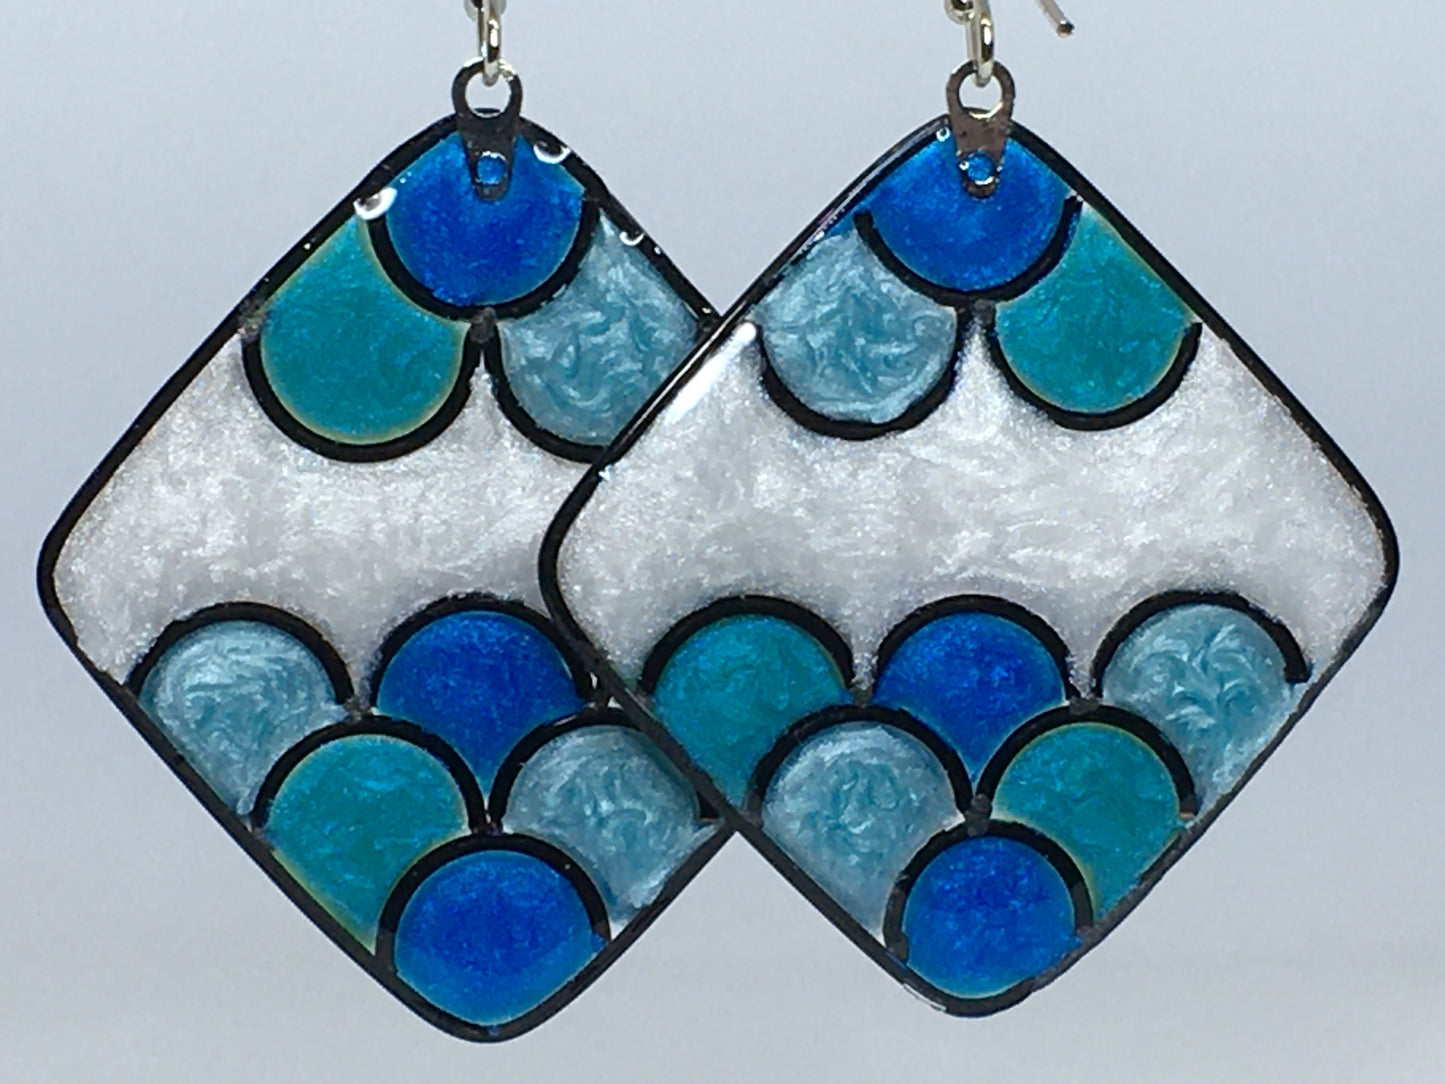 Blue, teal, mint and white resin earrings